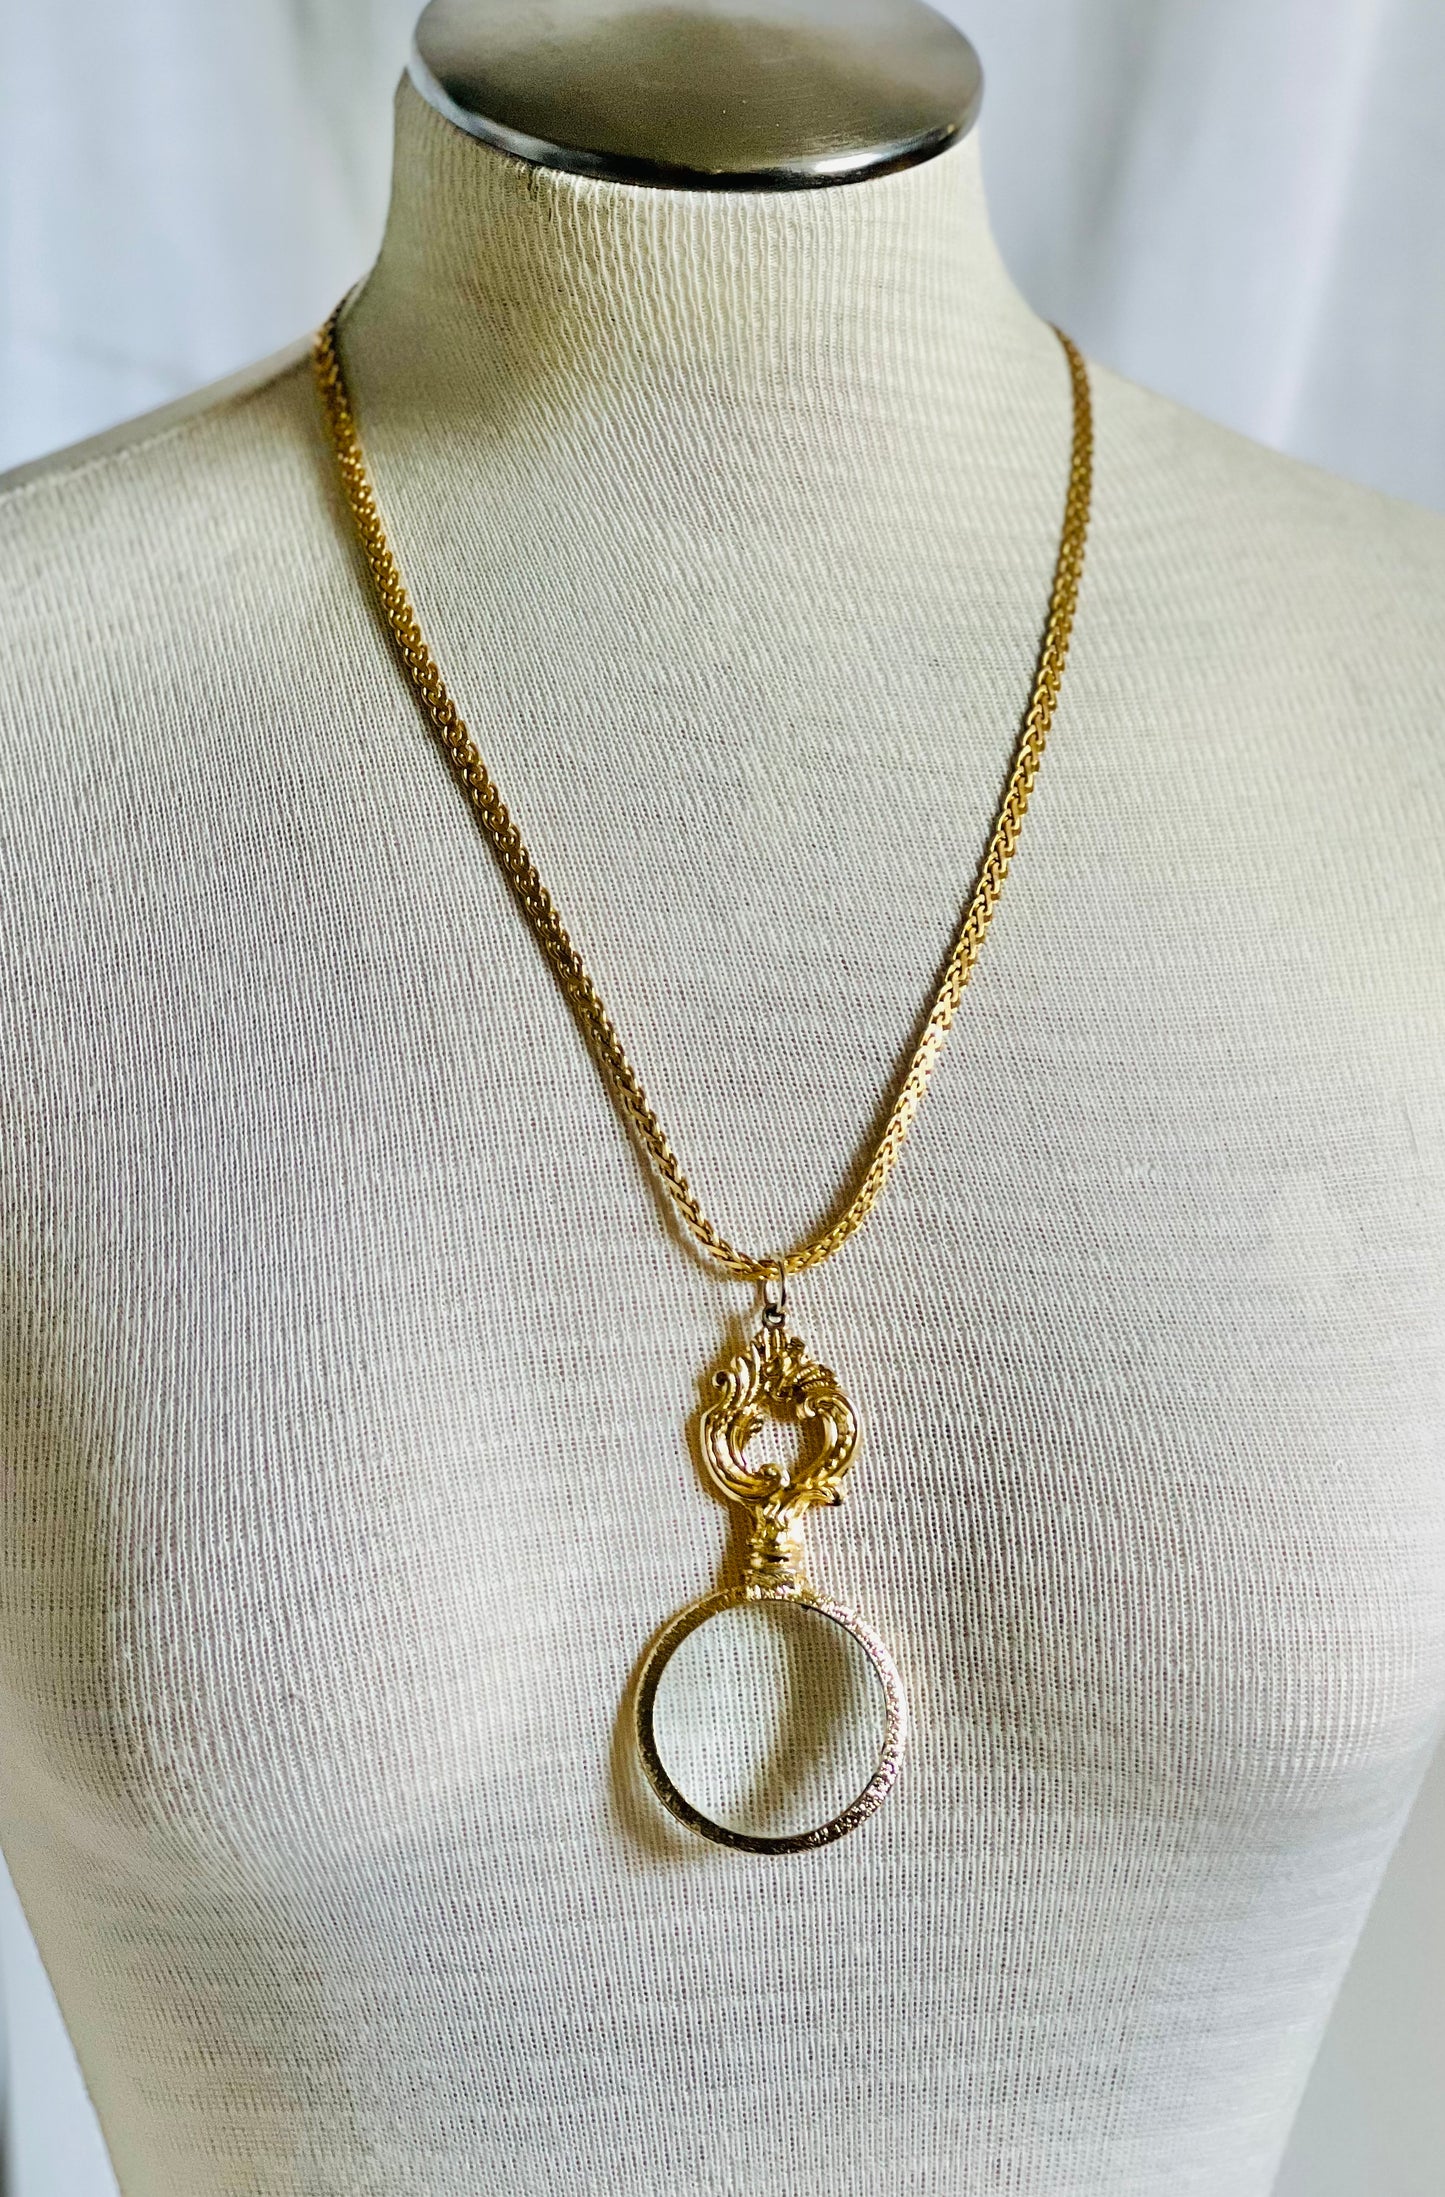 Vintage Ornate Gold Tone Magnifying Glass Chain Necklace